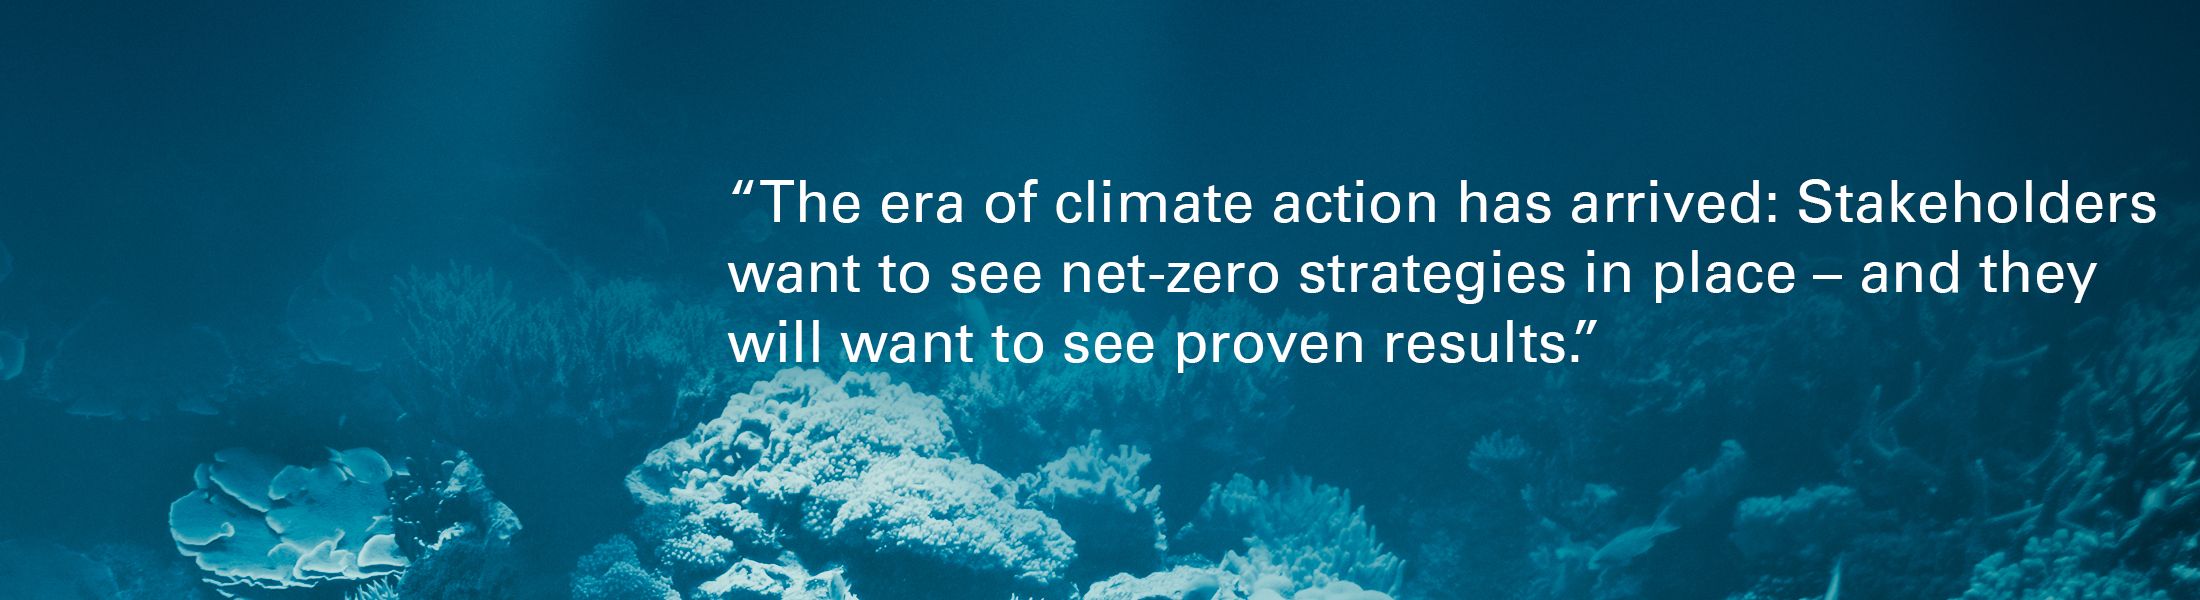 Ocean coral reef "The era of climate action has arrived: Stakeholders want to see net-zero strategies in place – and they will want to see proven results. "